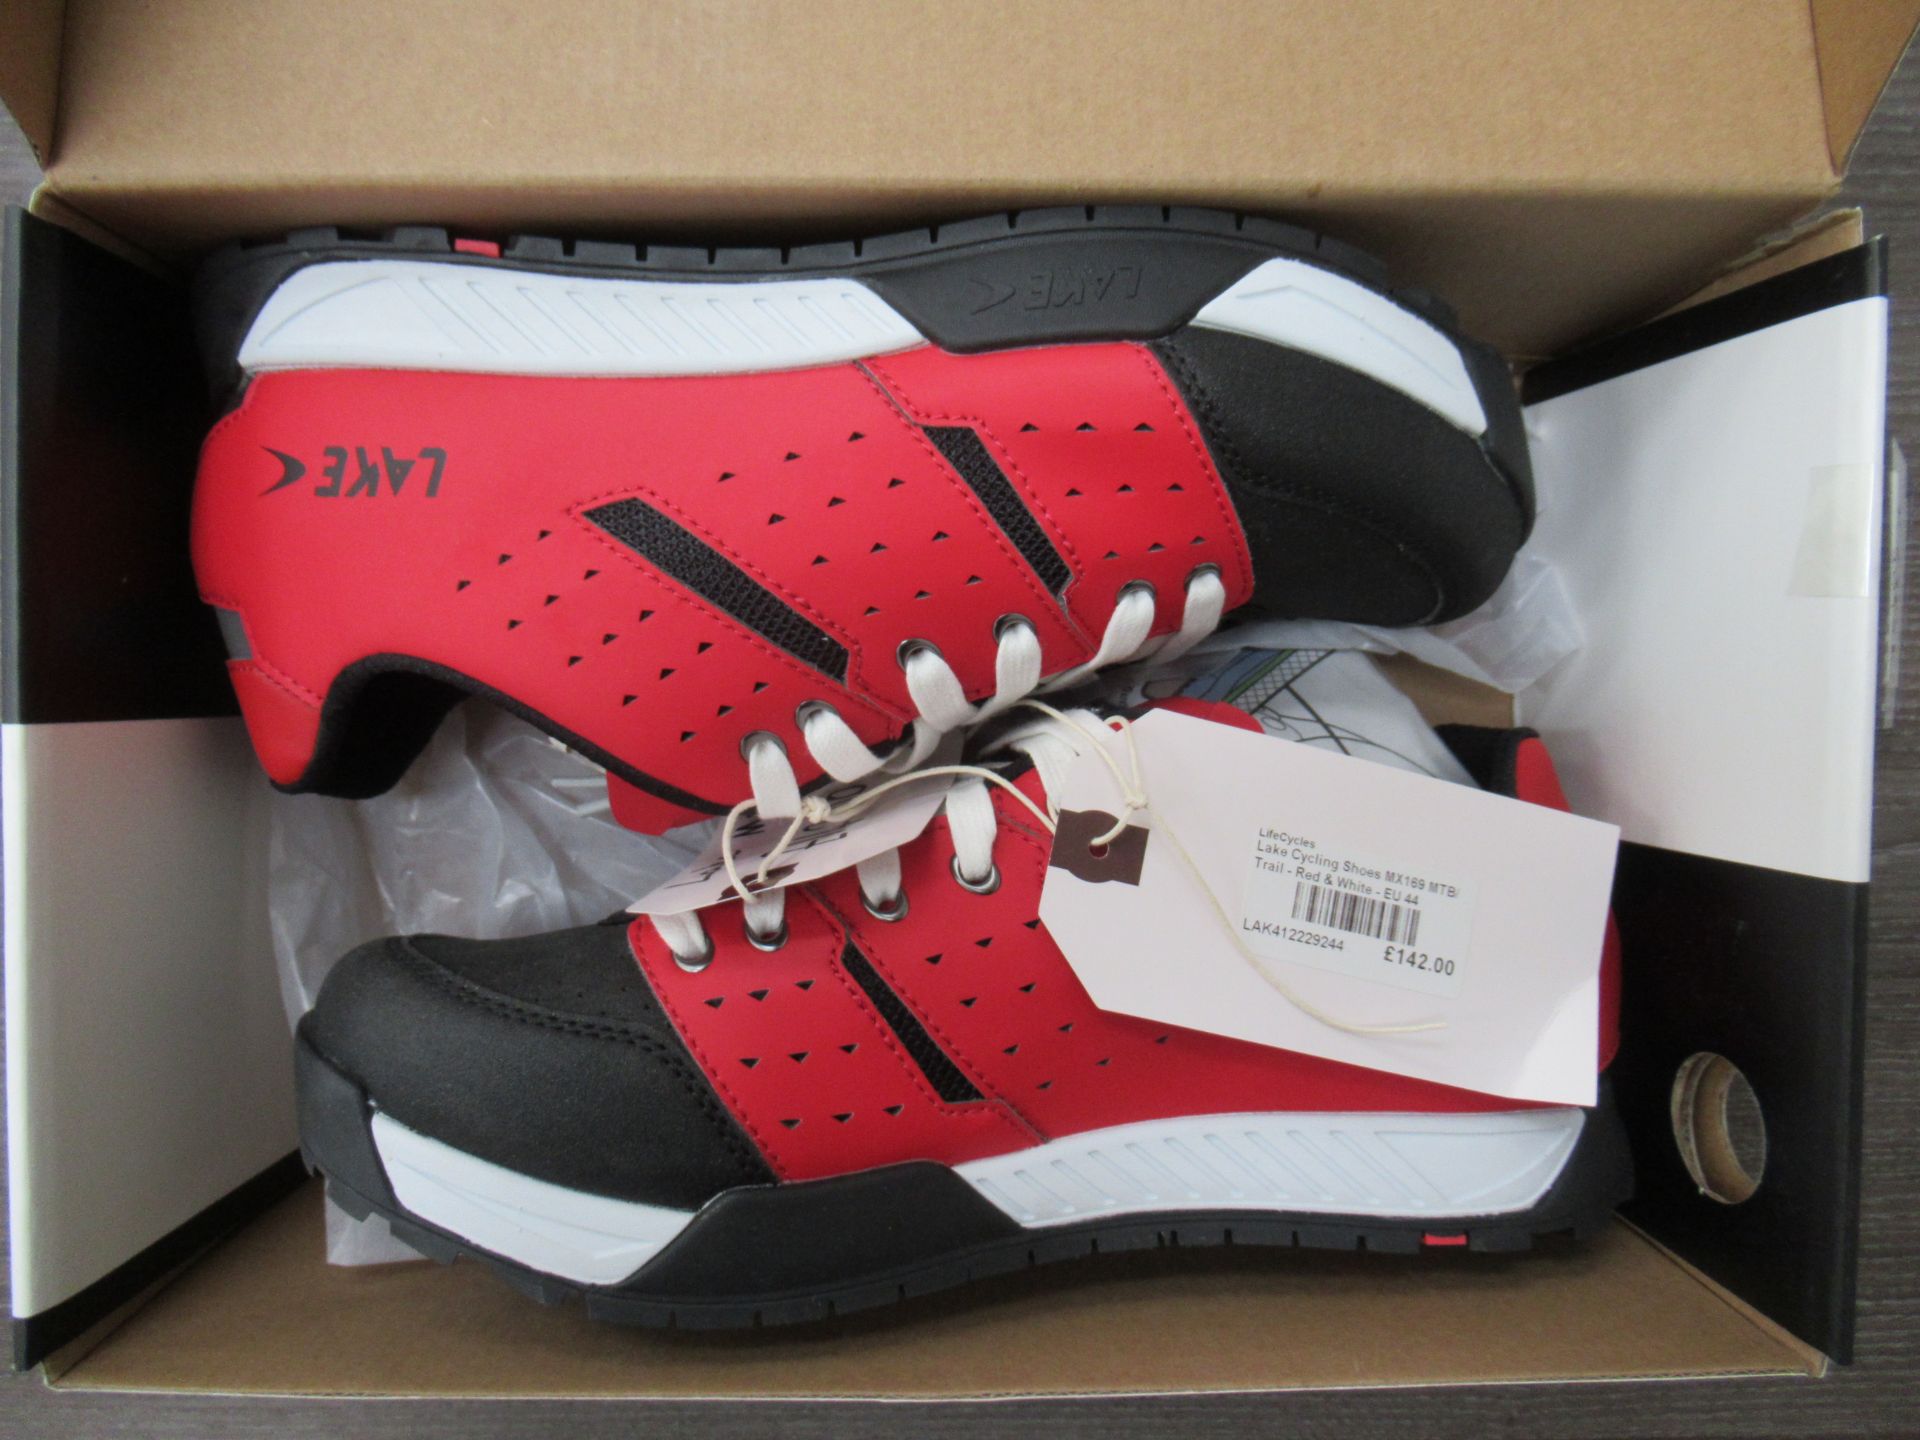 Pair of Lake MX169 cycling shoes (red/white) - boxed EU size 44 (RRP£142) - Image 4 of 4